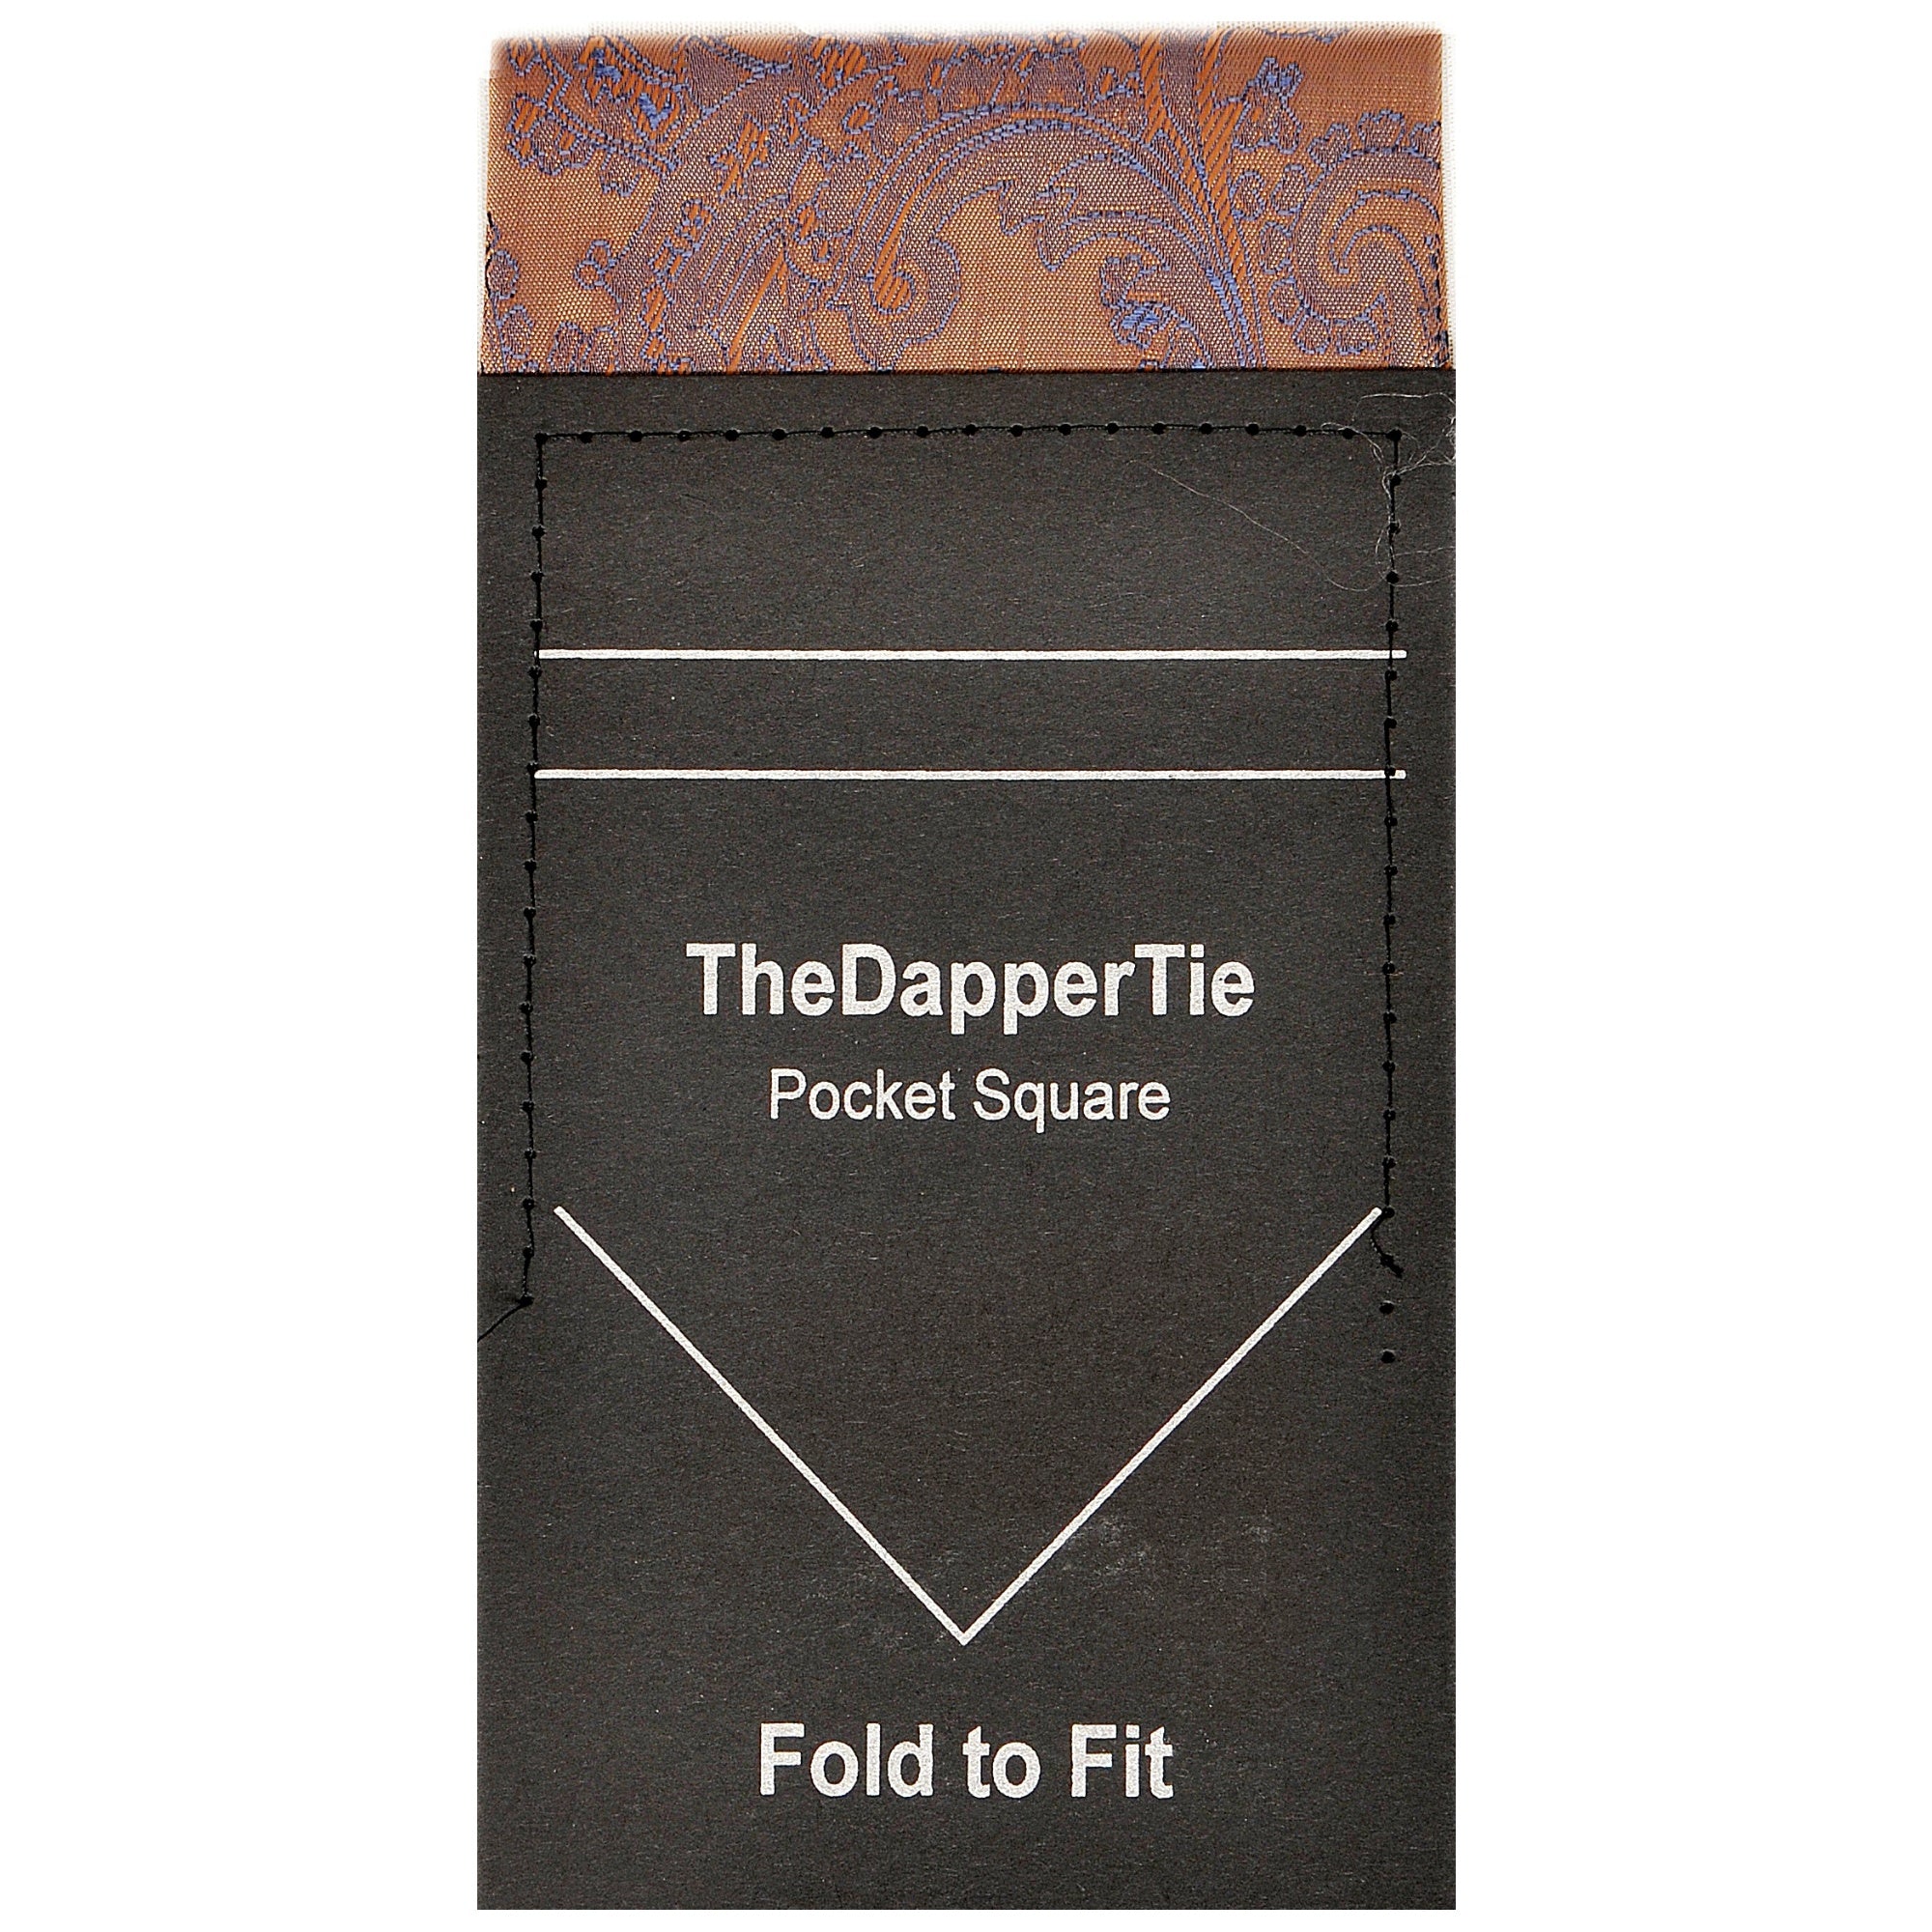 TheDapperTie - New Men's Paisley Flat Pre Folded Pocket Square on Card Prefolded Pocket Squares TheDapperTie Navy & Light Brown Regular 